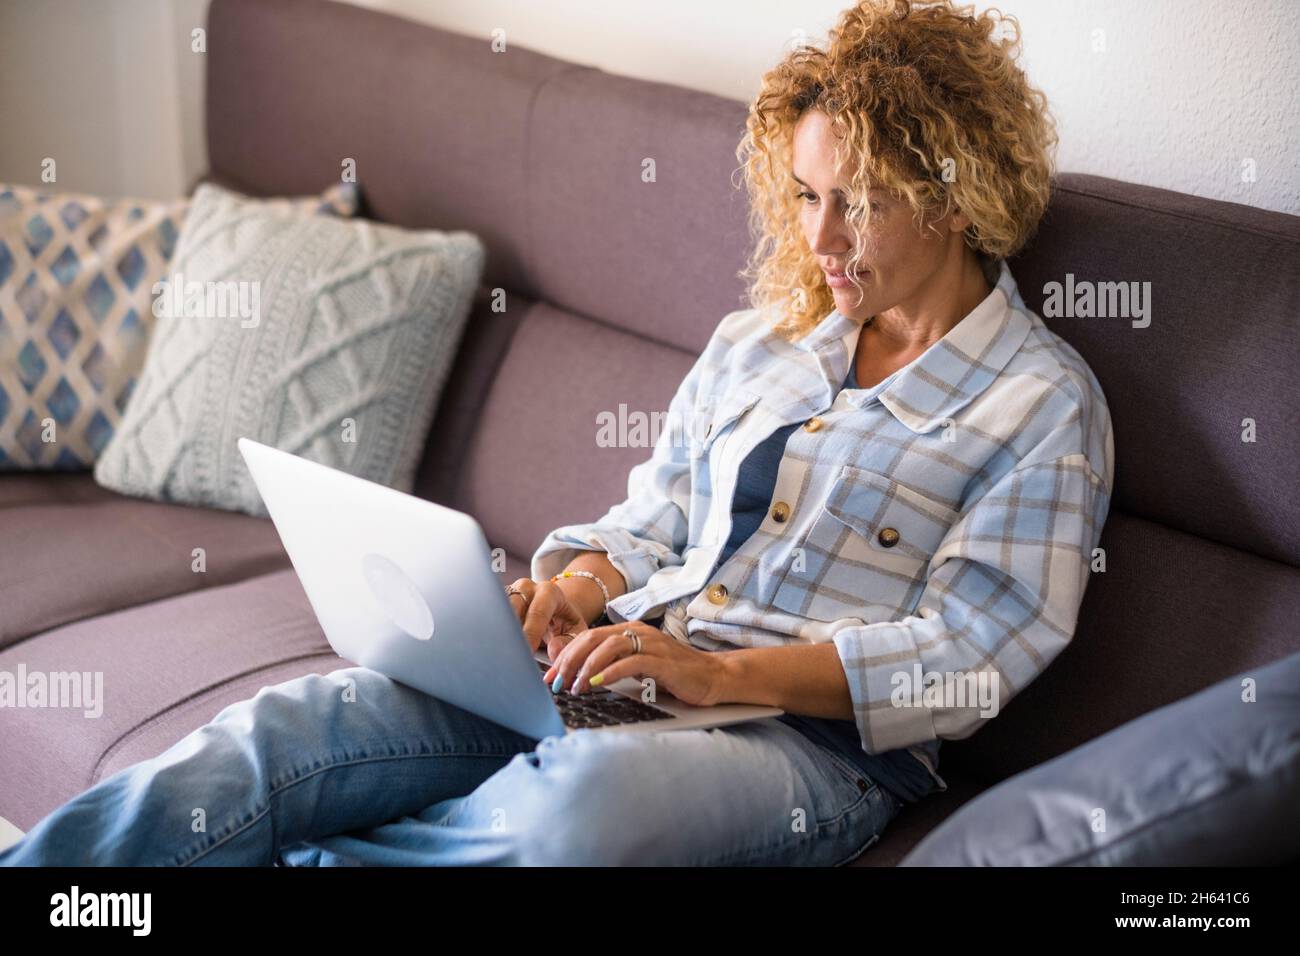 adult pretty female people watch internet computer contents lay down and relaxing on the couch at home - woman smile looking display and enjoy alternative job and work lifestyle - lady with glasses Stock Photo